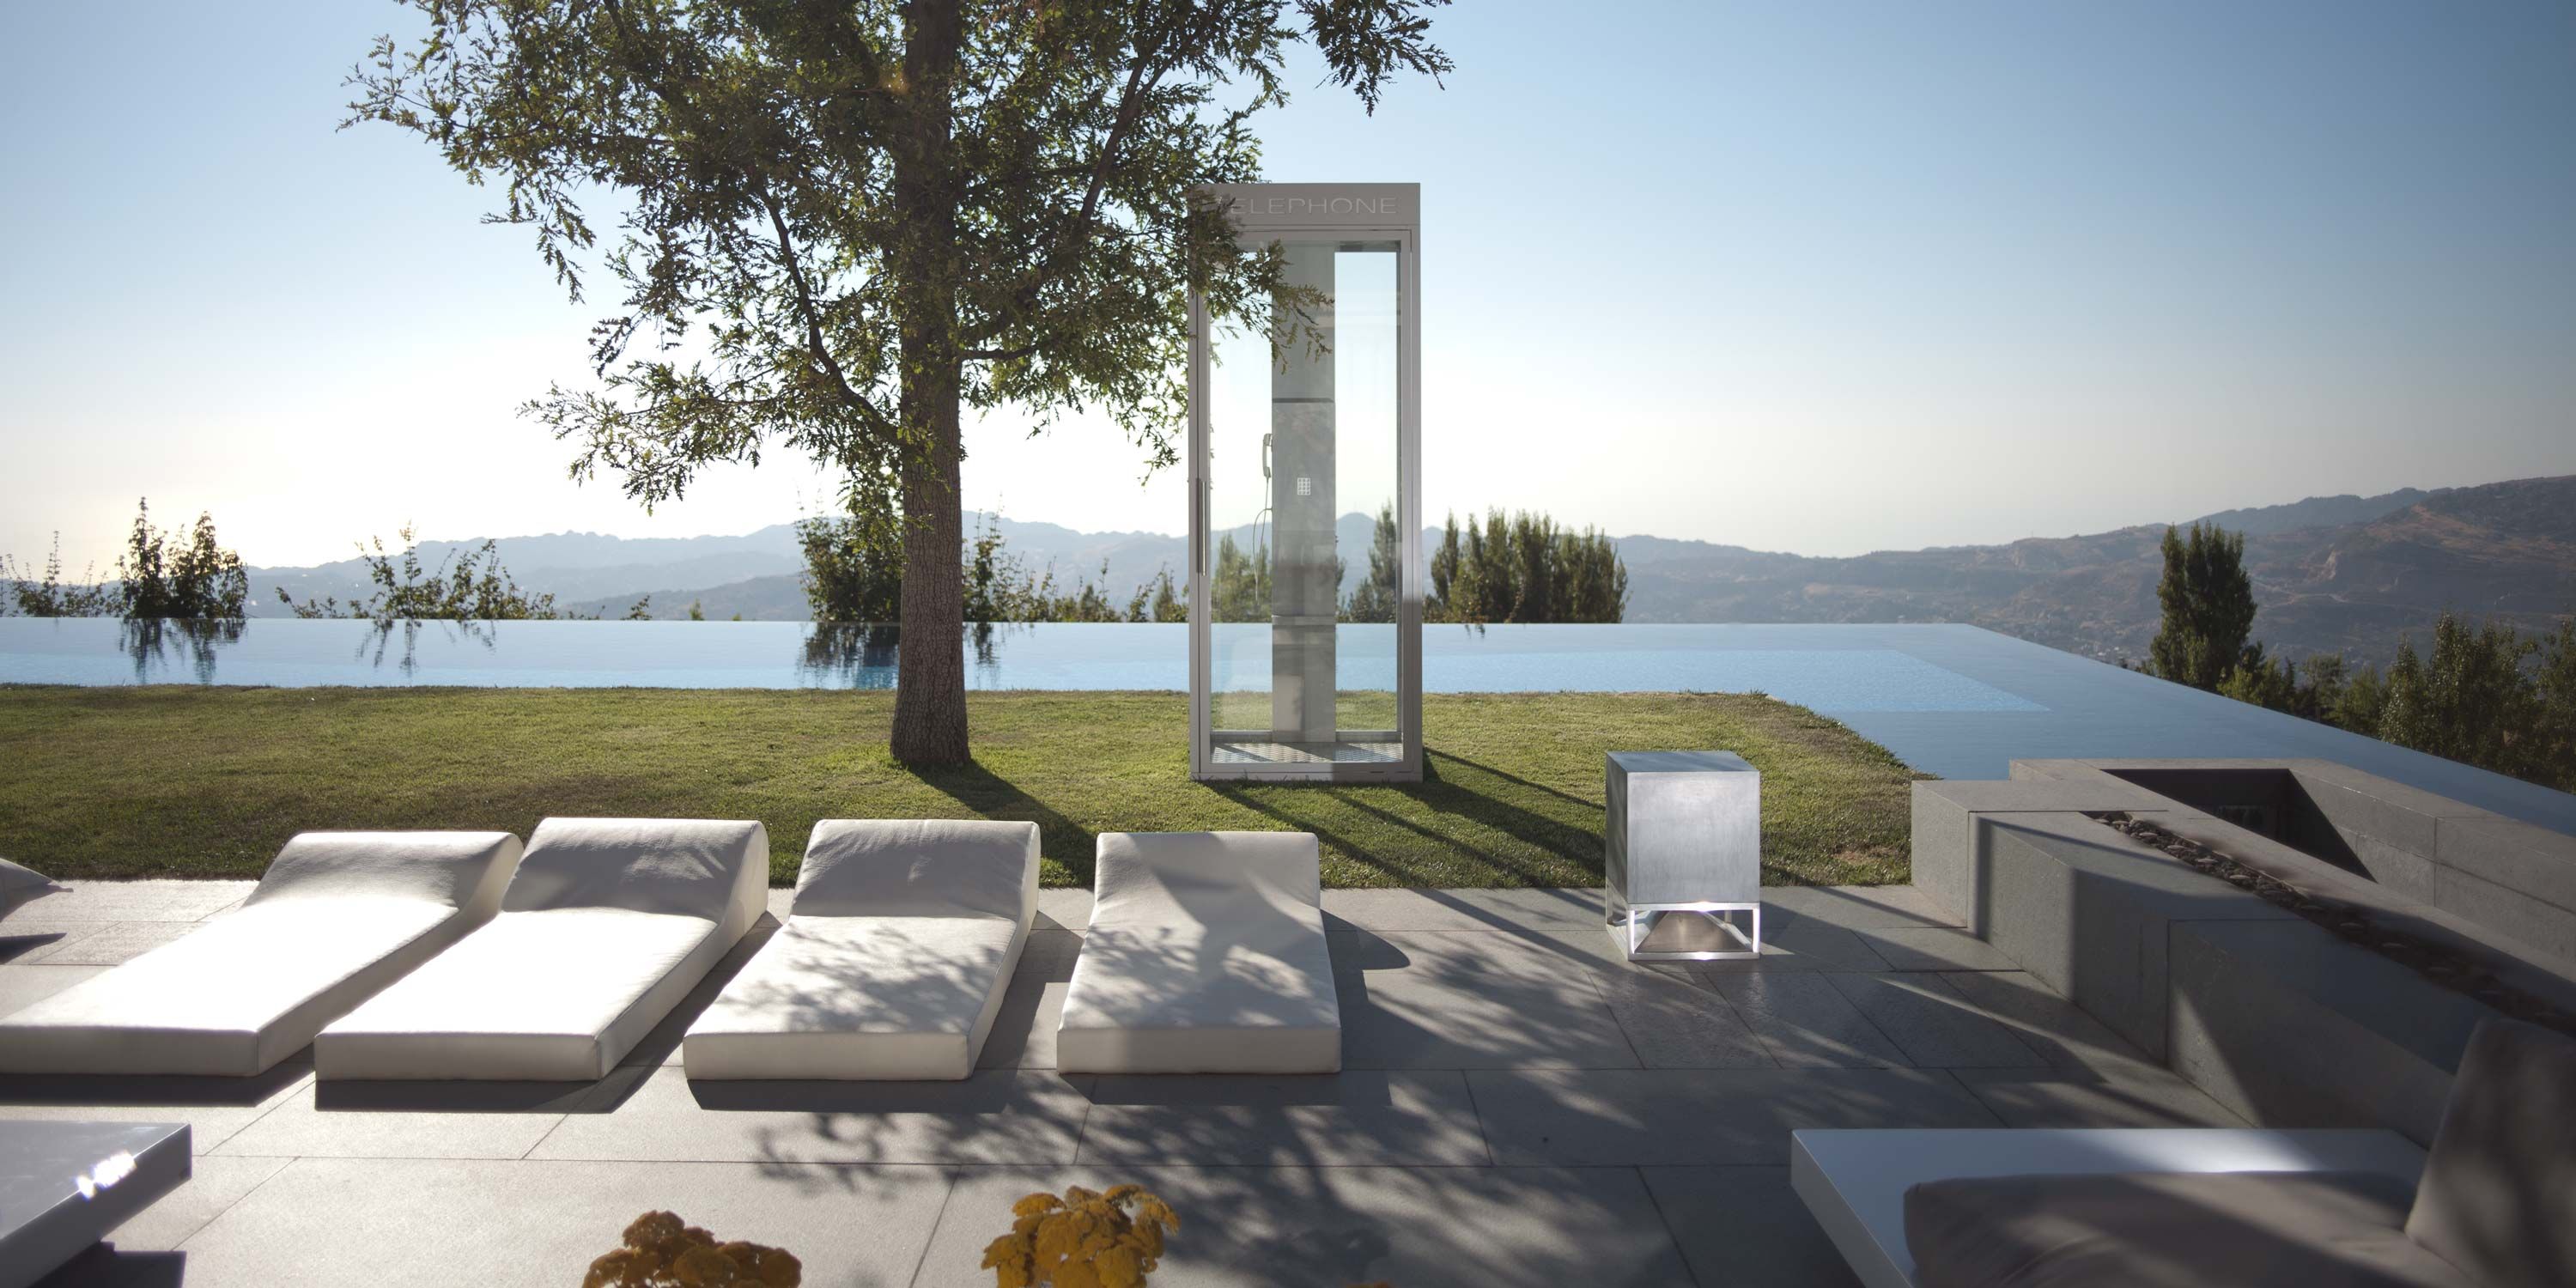 infinity pool with mountain view and archittetura sonora speakers